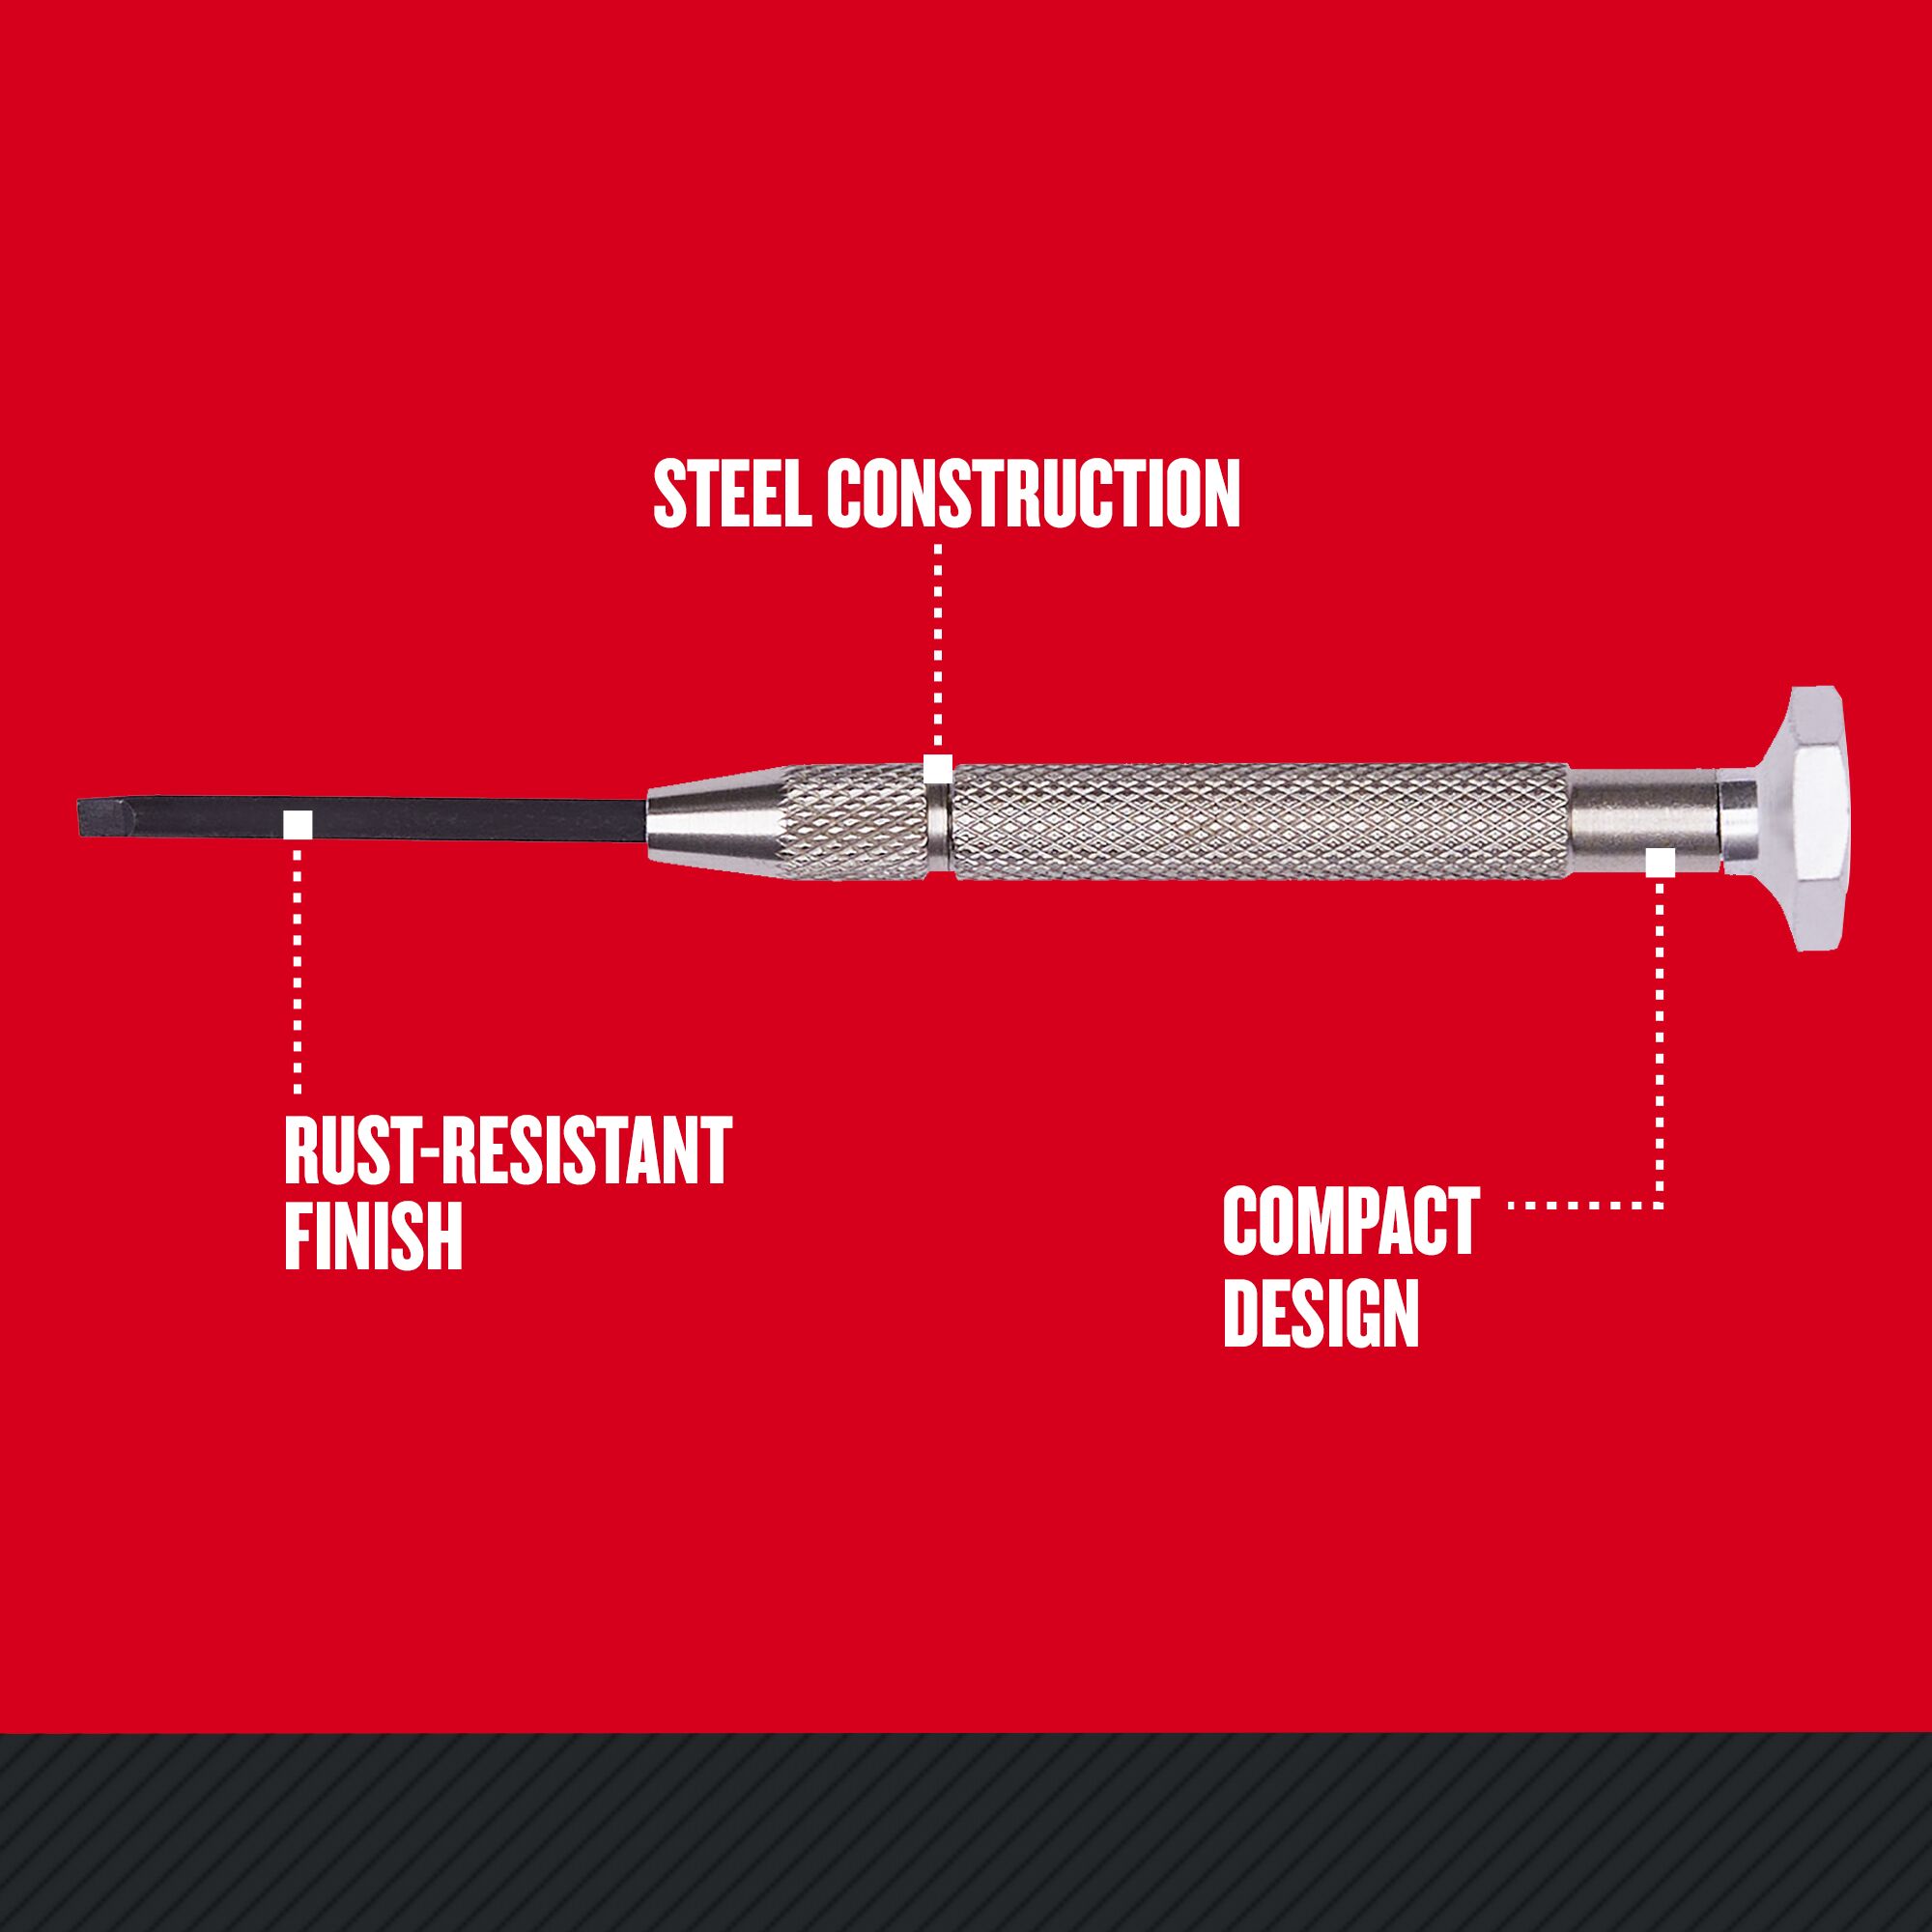 Graphic of CRAFTSMAN Screwdrivers: Multi Bits highlighting product features